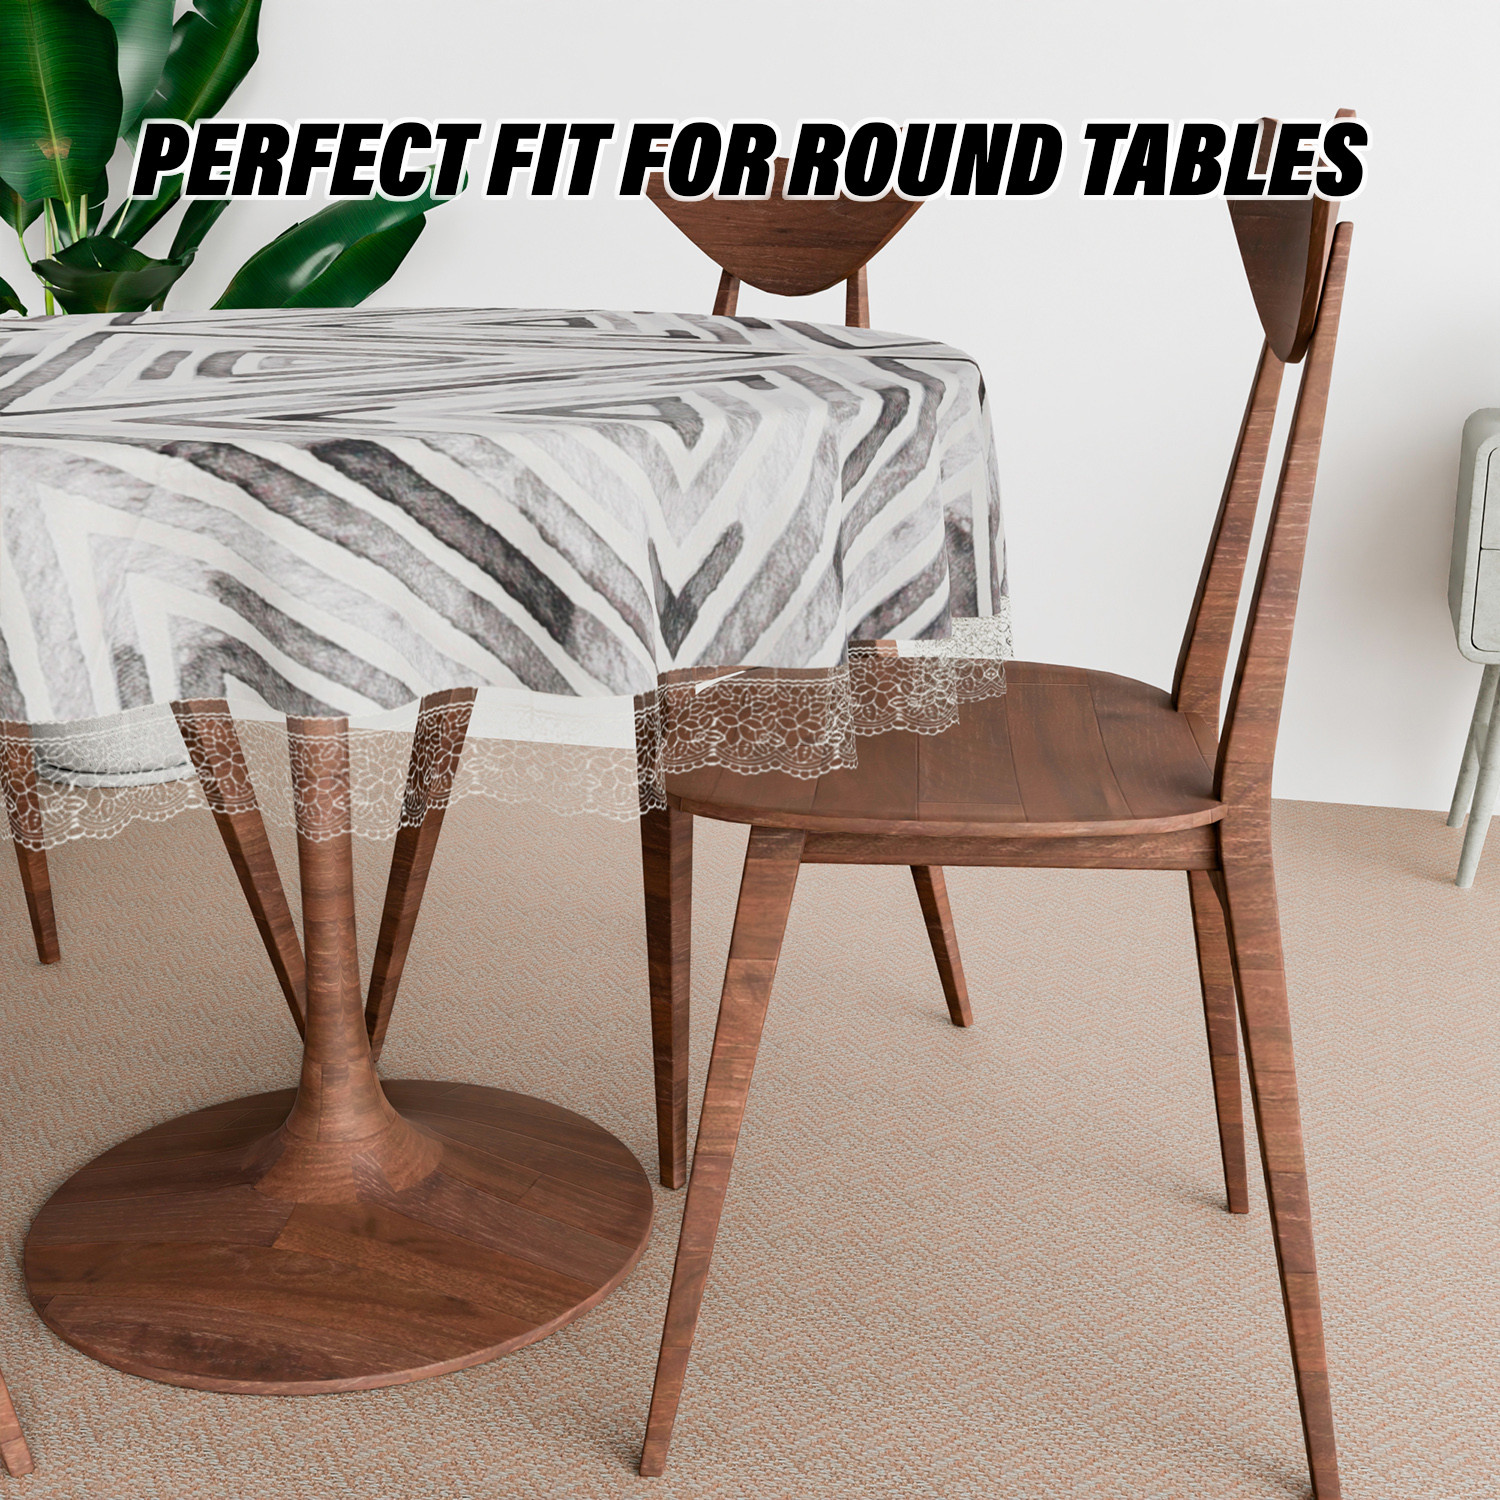 Kuber Industries Round Table Cover | PVC Table Cloth for Round Tables | 4 Seater Round Table Cloth | Triangle Kitchen Dining Tablecloth | Tabletop Cover | 60 Inch | Gray